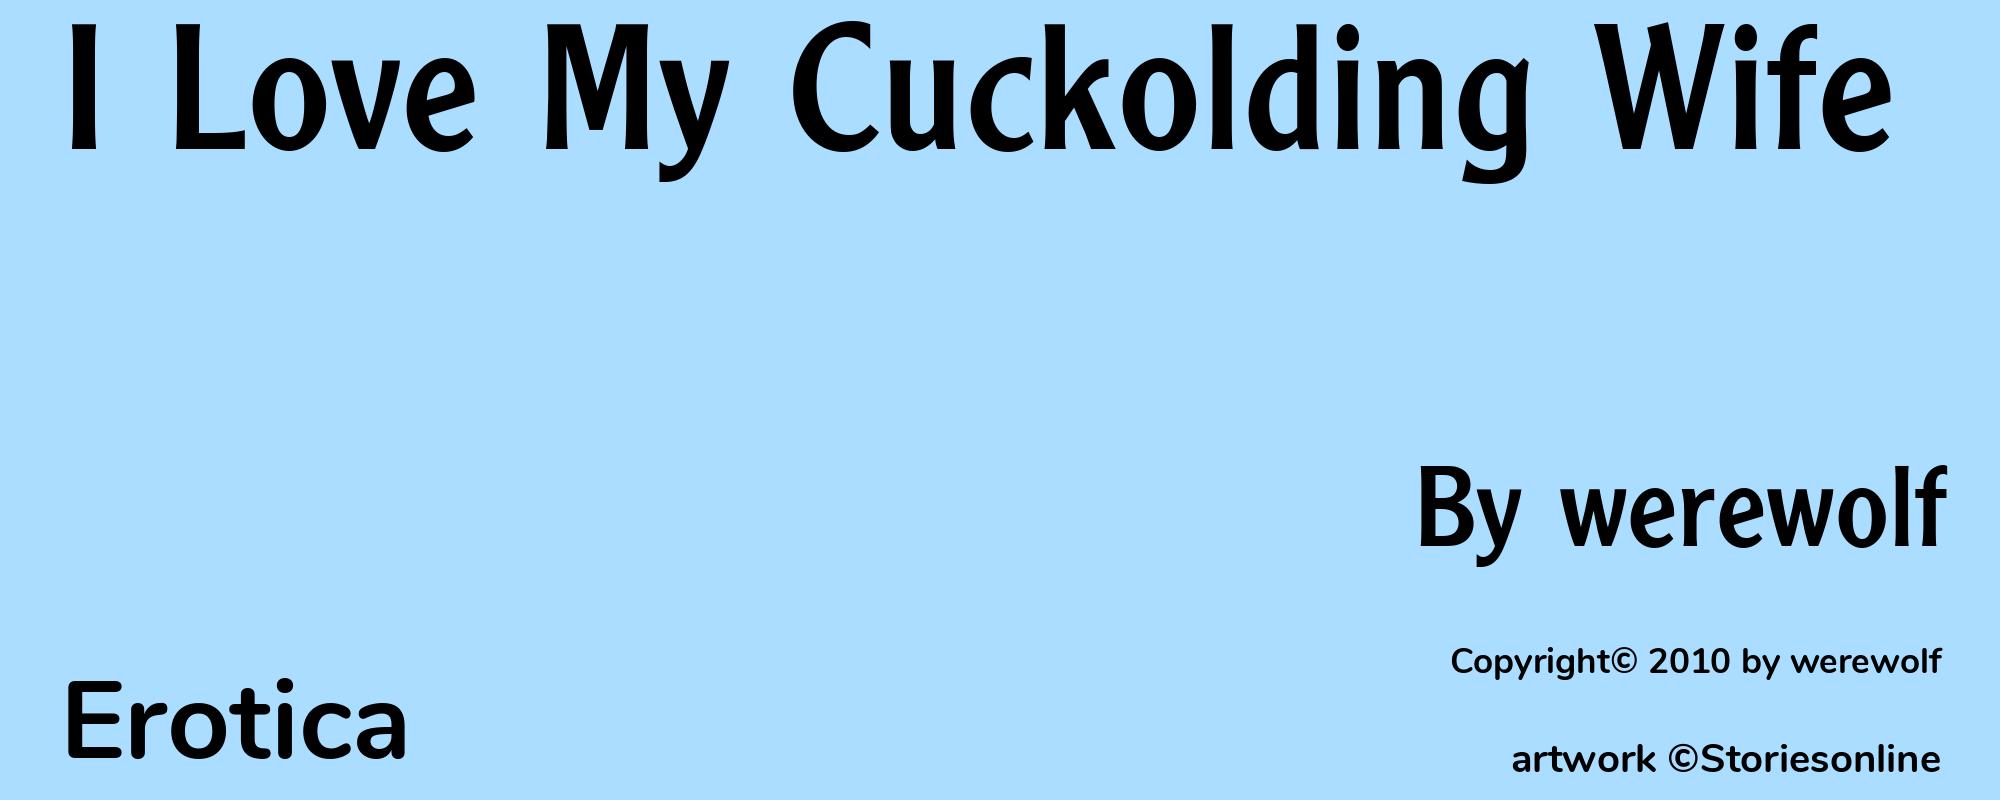 I Love My Cuckolding Wife - Cover